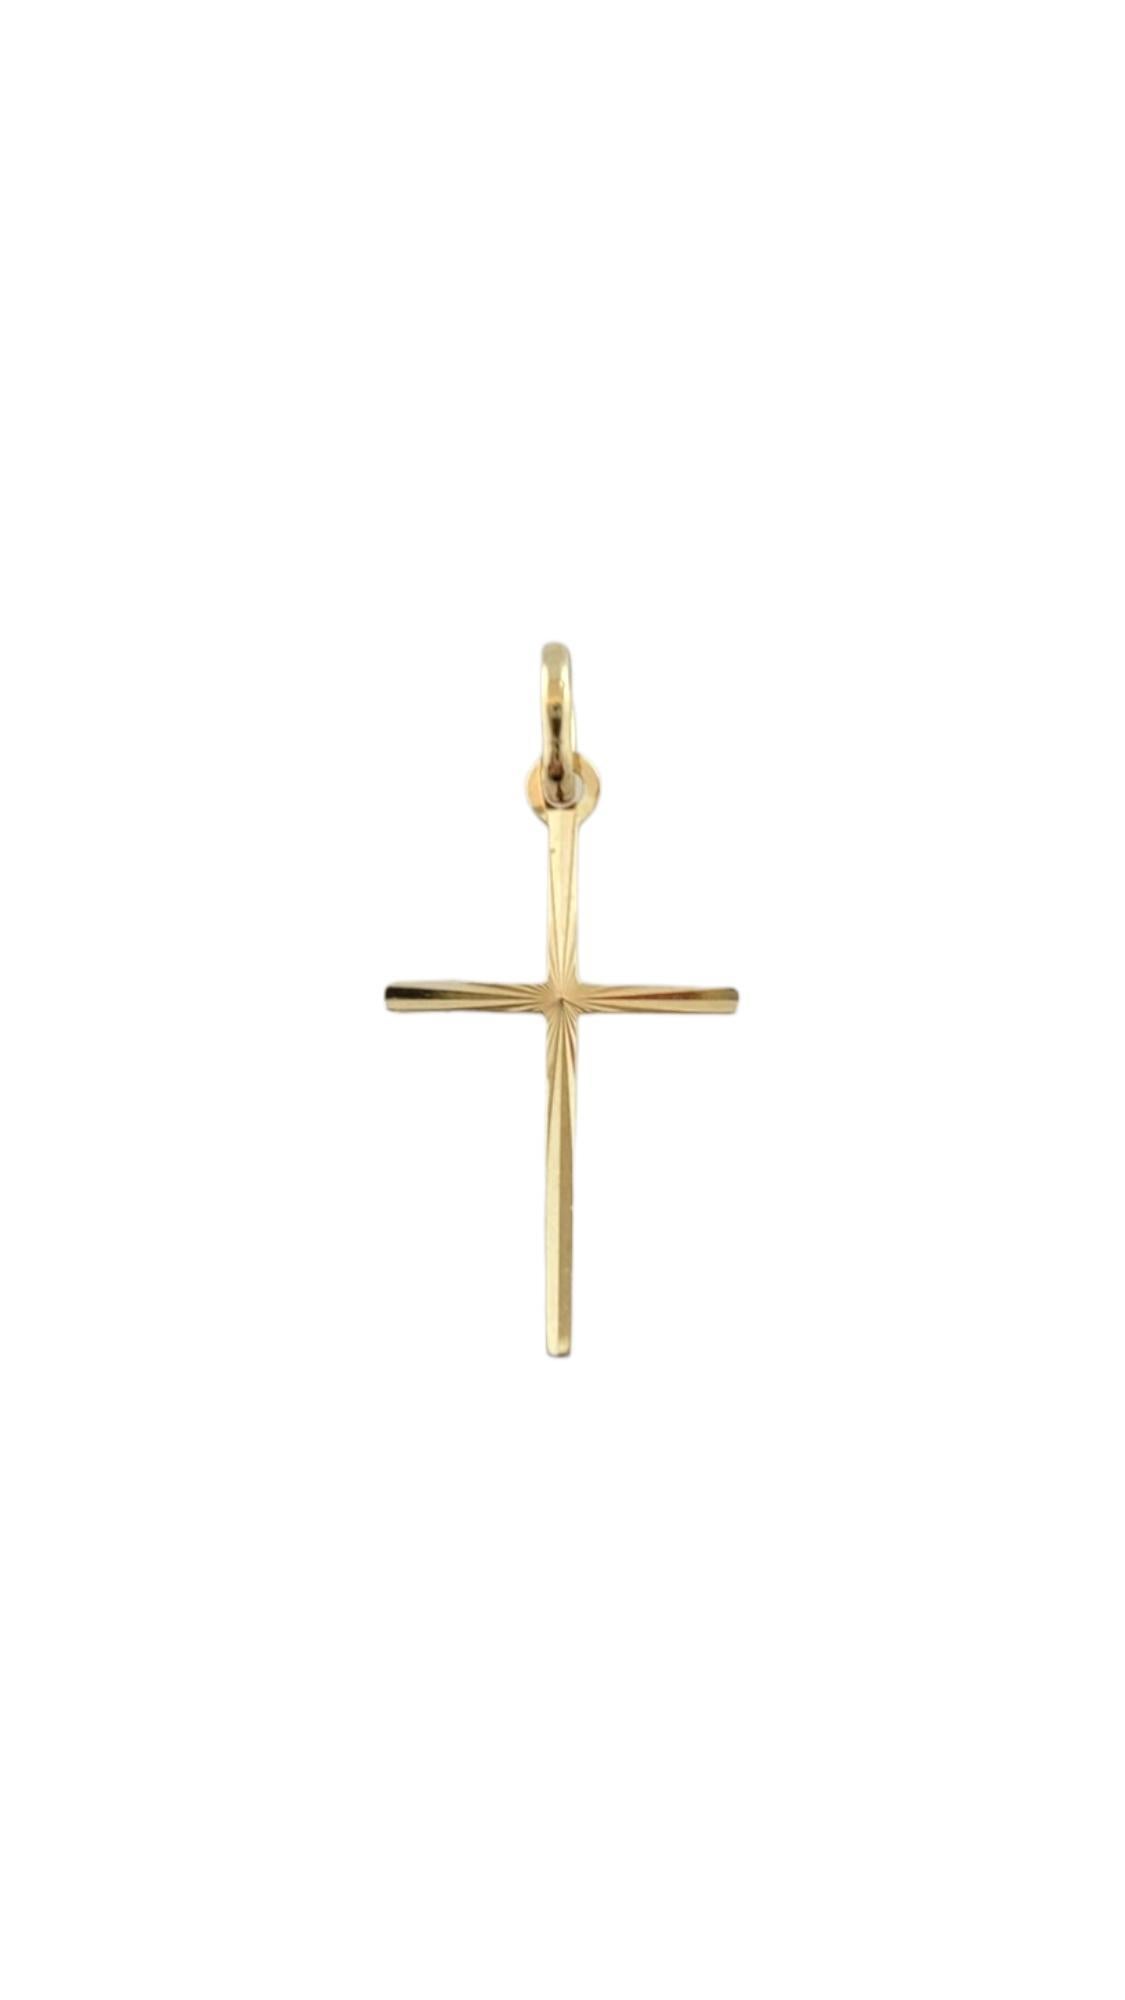 Vintage 14K Yellow Gold Cross Charm

Lovely simple cross charm in 14 karat yellow gold.

Hallmark: ITALY 14KS

Weight: 0.3 g/ 0.2 dwt.

Measurements: 20.6 mm X 12.07 mm

Very good condition, professionally polished.

Will come packaged in a gift box